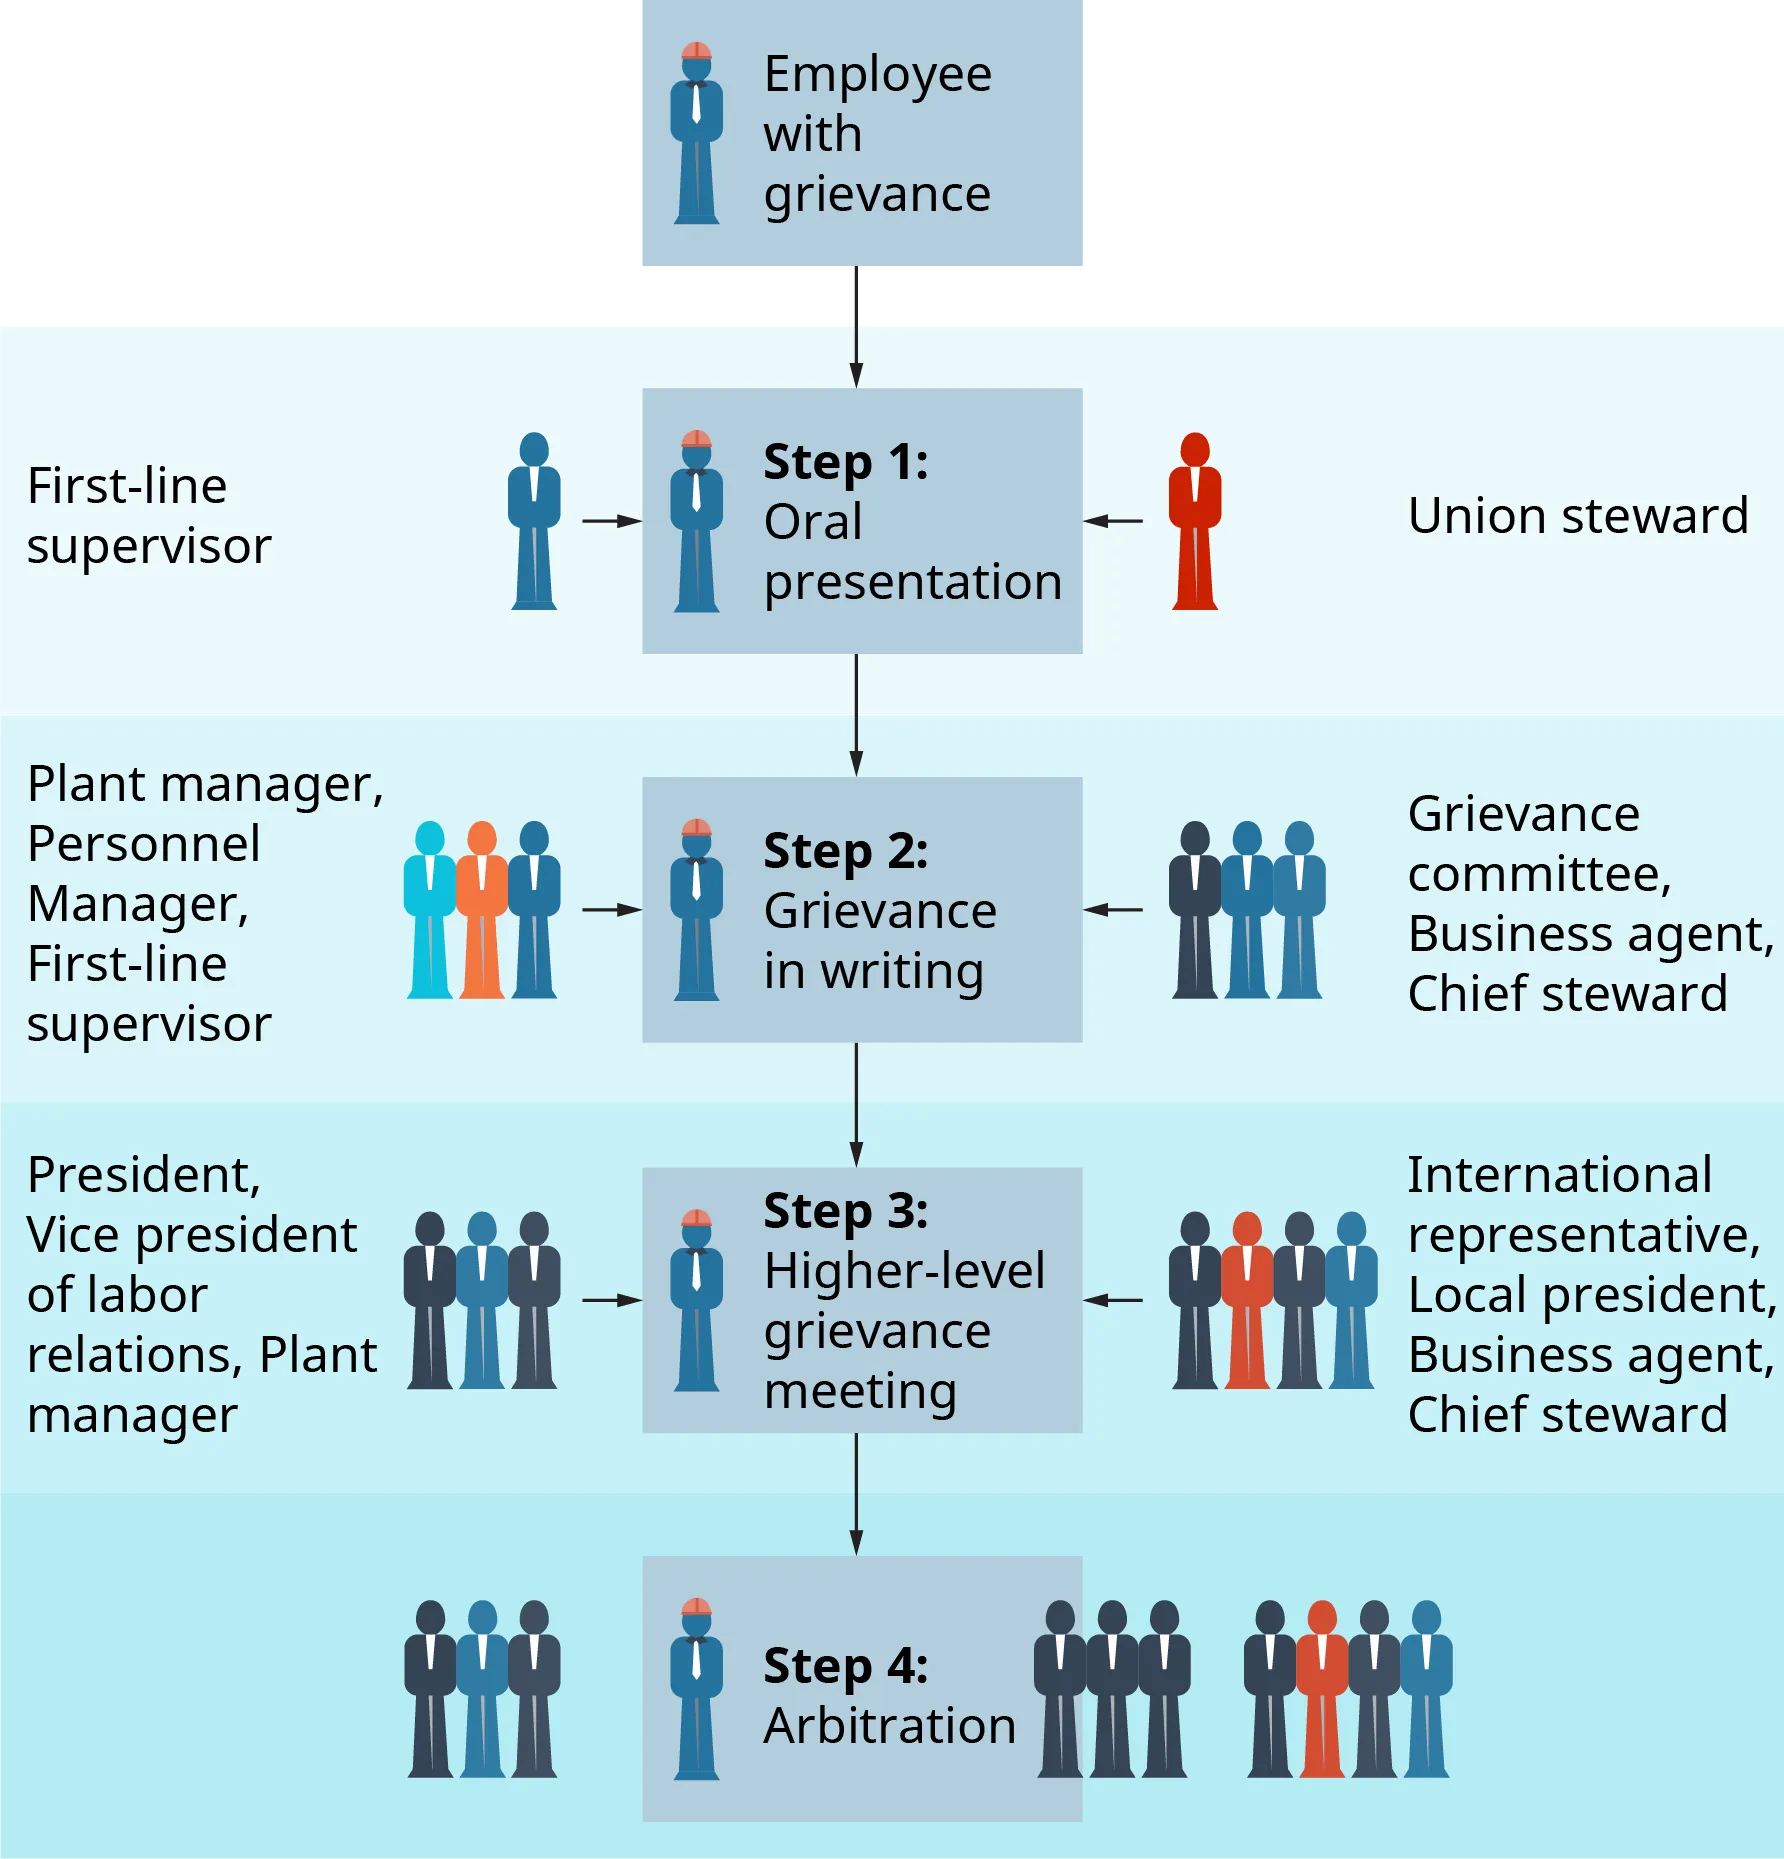 The diagram starts with an employee with a grievance. Step 1 is an oral presentation between the first line supervisor, and the union steward. Step 2 is grievance in writing. On one side is the plant manager, personnel manager, and first line supervisor. On the opposite side is the grievance committee, business agent, and Chief steward. Step 3 is a higher level grievance meeting. On one side is the president, vice president of labor relations, and the plant manager. On the opposite side is the international representative, local president, business agent, and chief steward. Step 4 is arbitration.